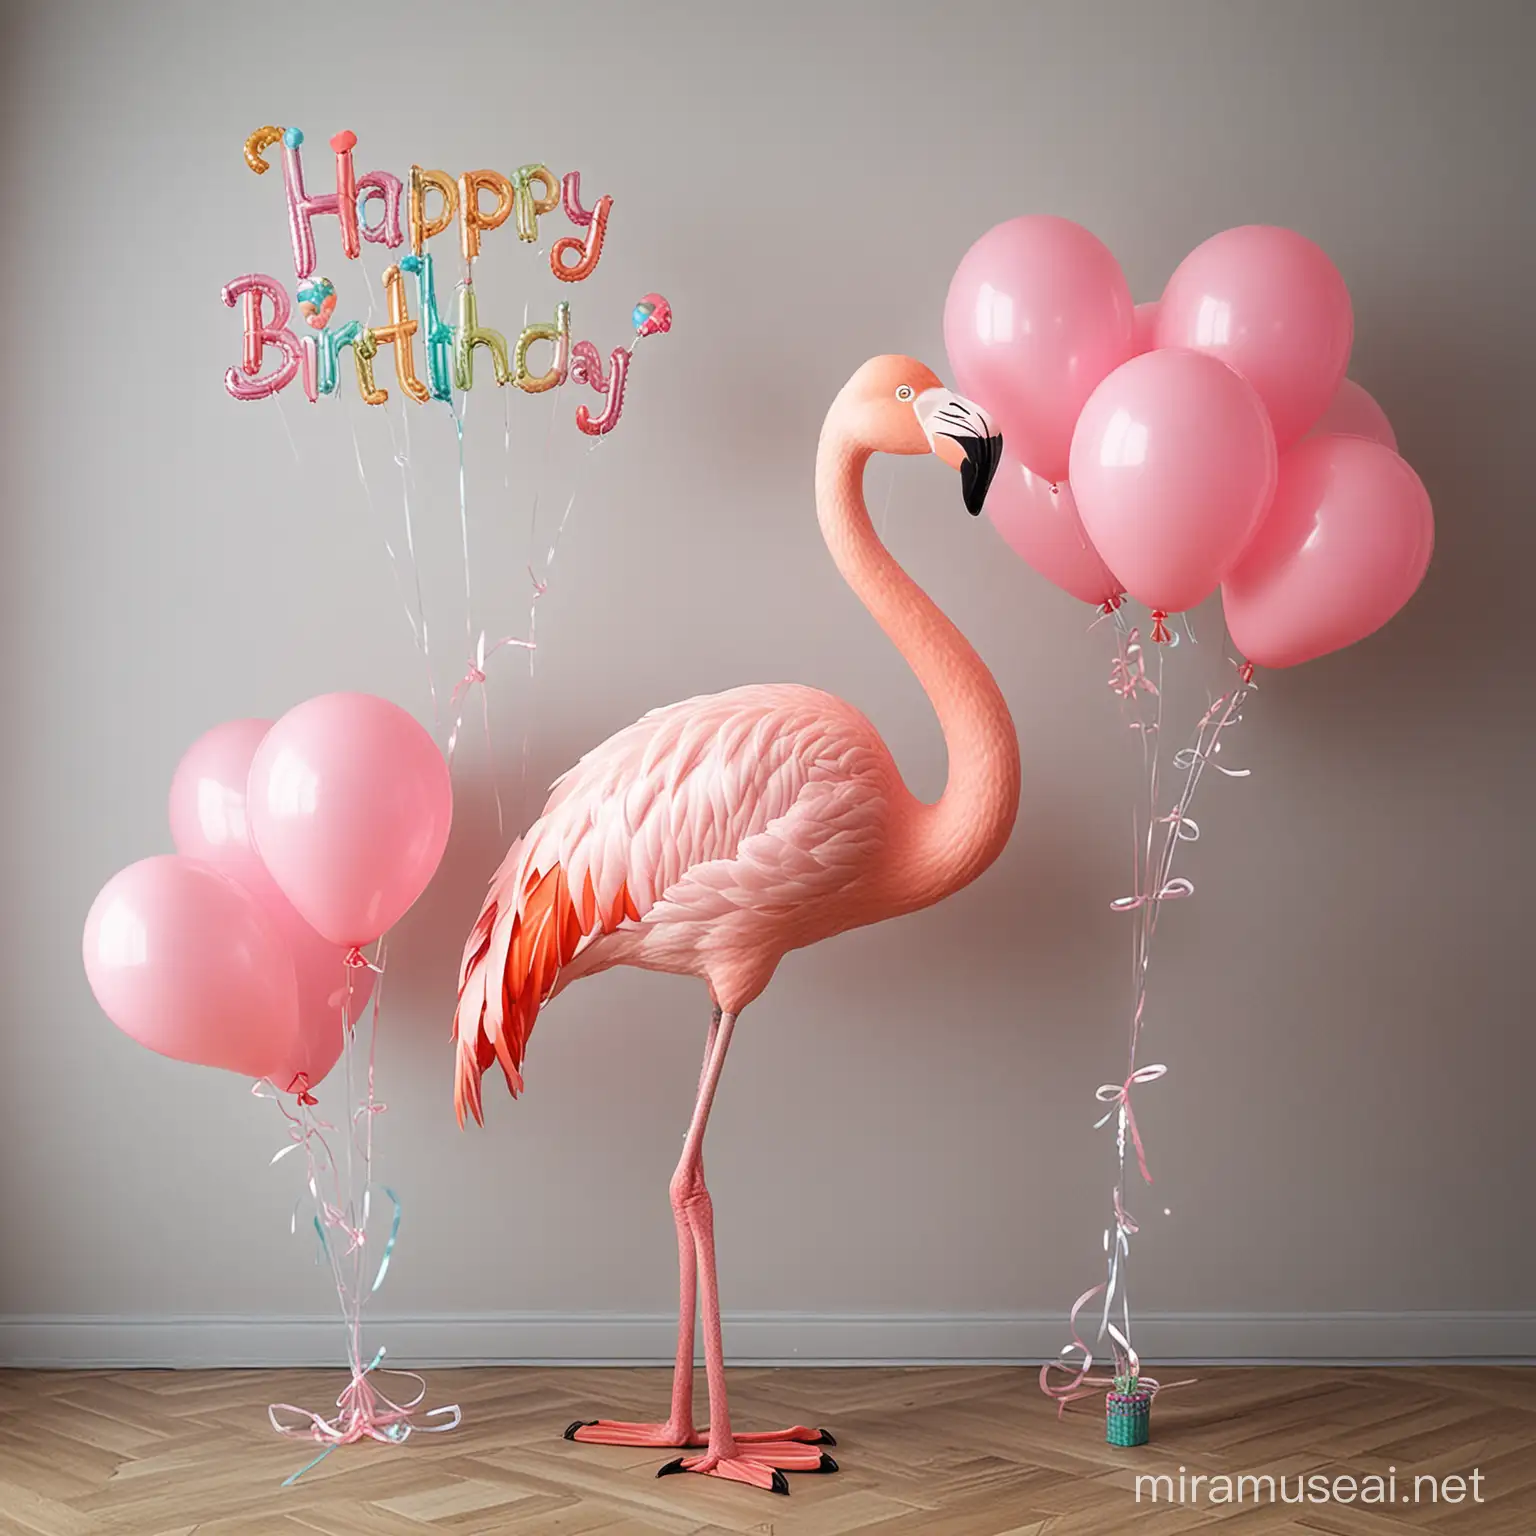 pink flamingo holding a bunch of happy birthday balloons